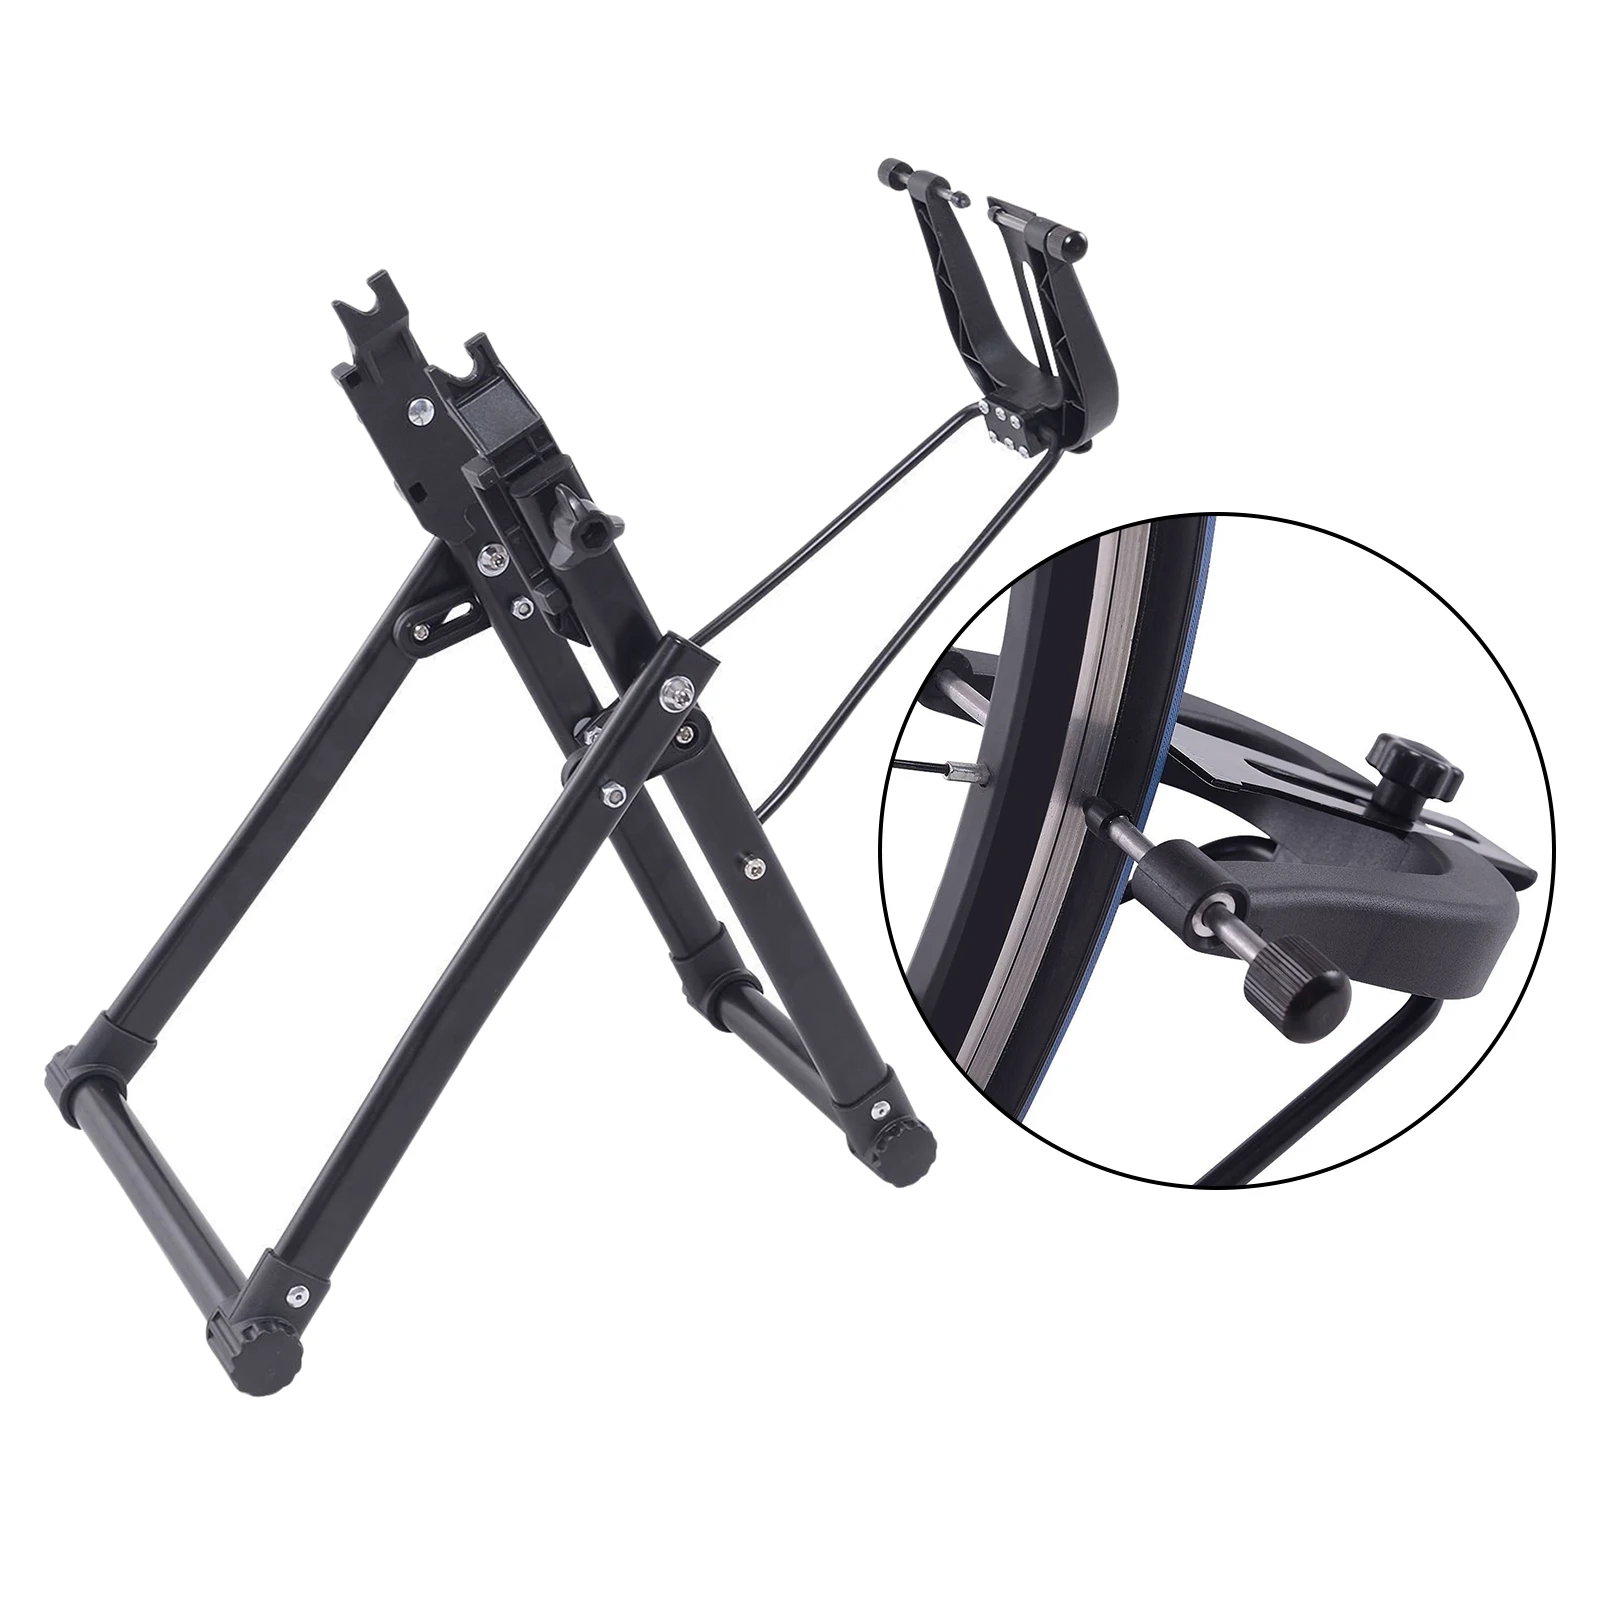 Details about   Bike Bicycle Wheel Truing Stand Maintenance Cycling Parts Repairing Tool Folding 